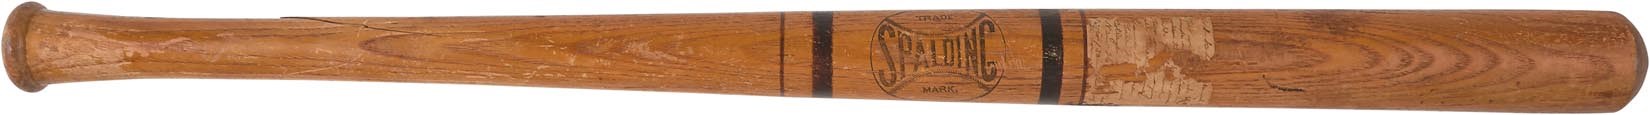 - 1880s Spalding Bat w/Earliest Known Use of the Term Memorabilia (Samuel M. Chase Collection)